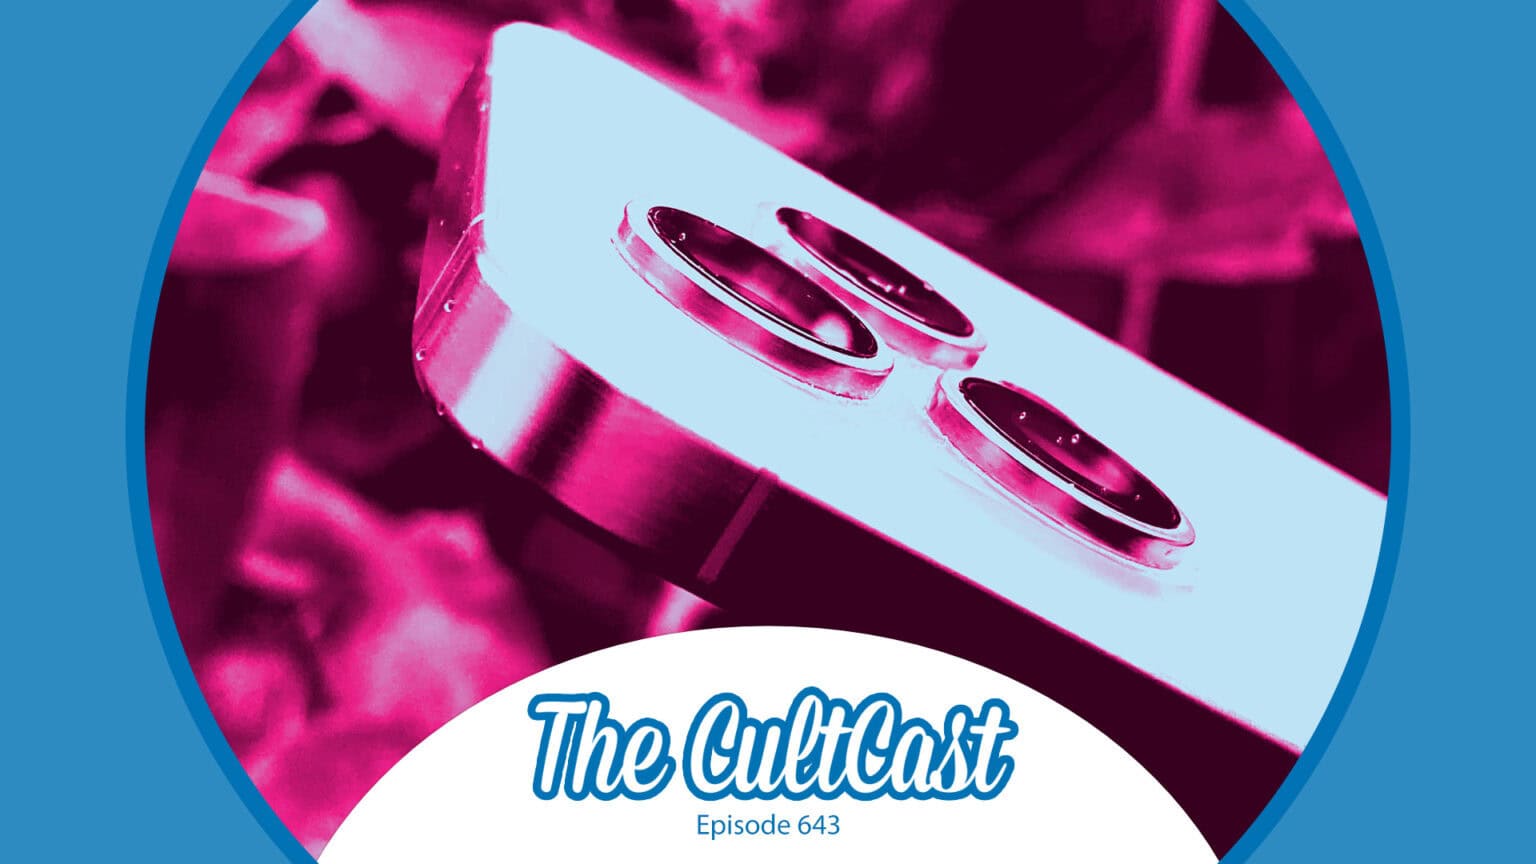 iPhone 16 Pro camera rumors on The CultCast episode 643